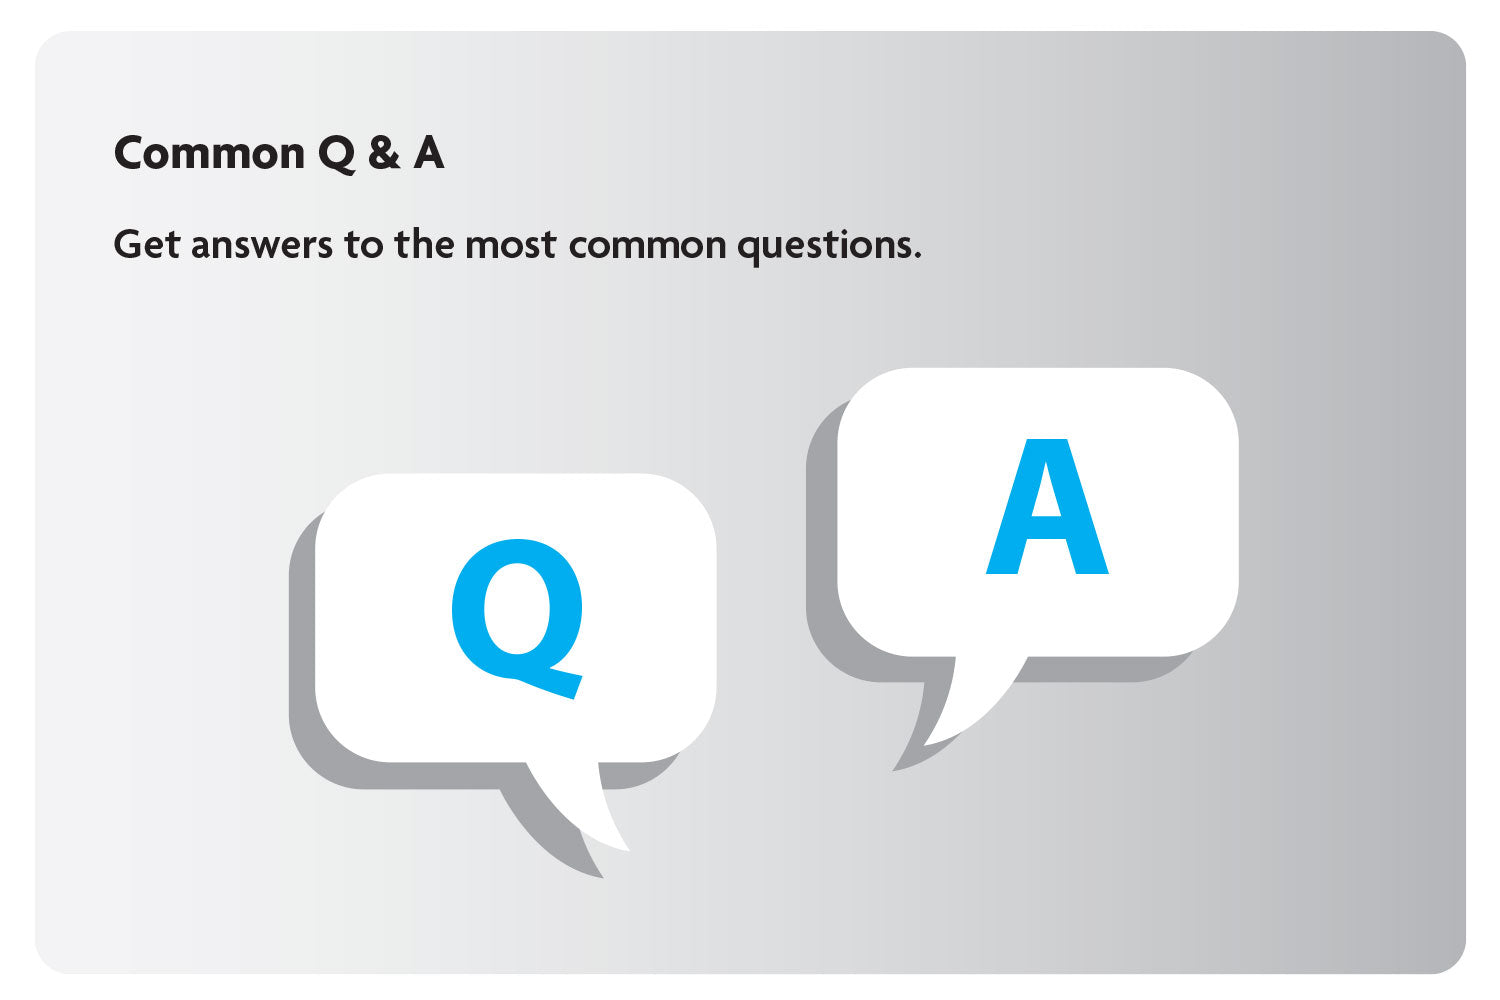 Common Q&A: Get answers to the most common questions.